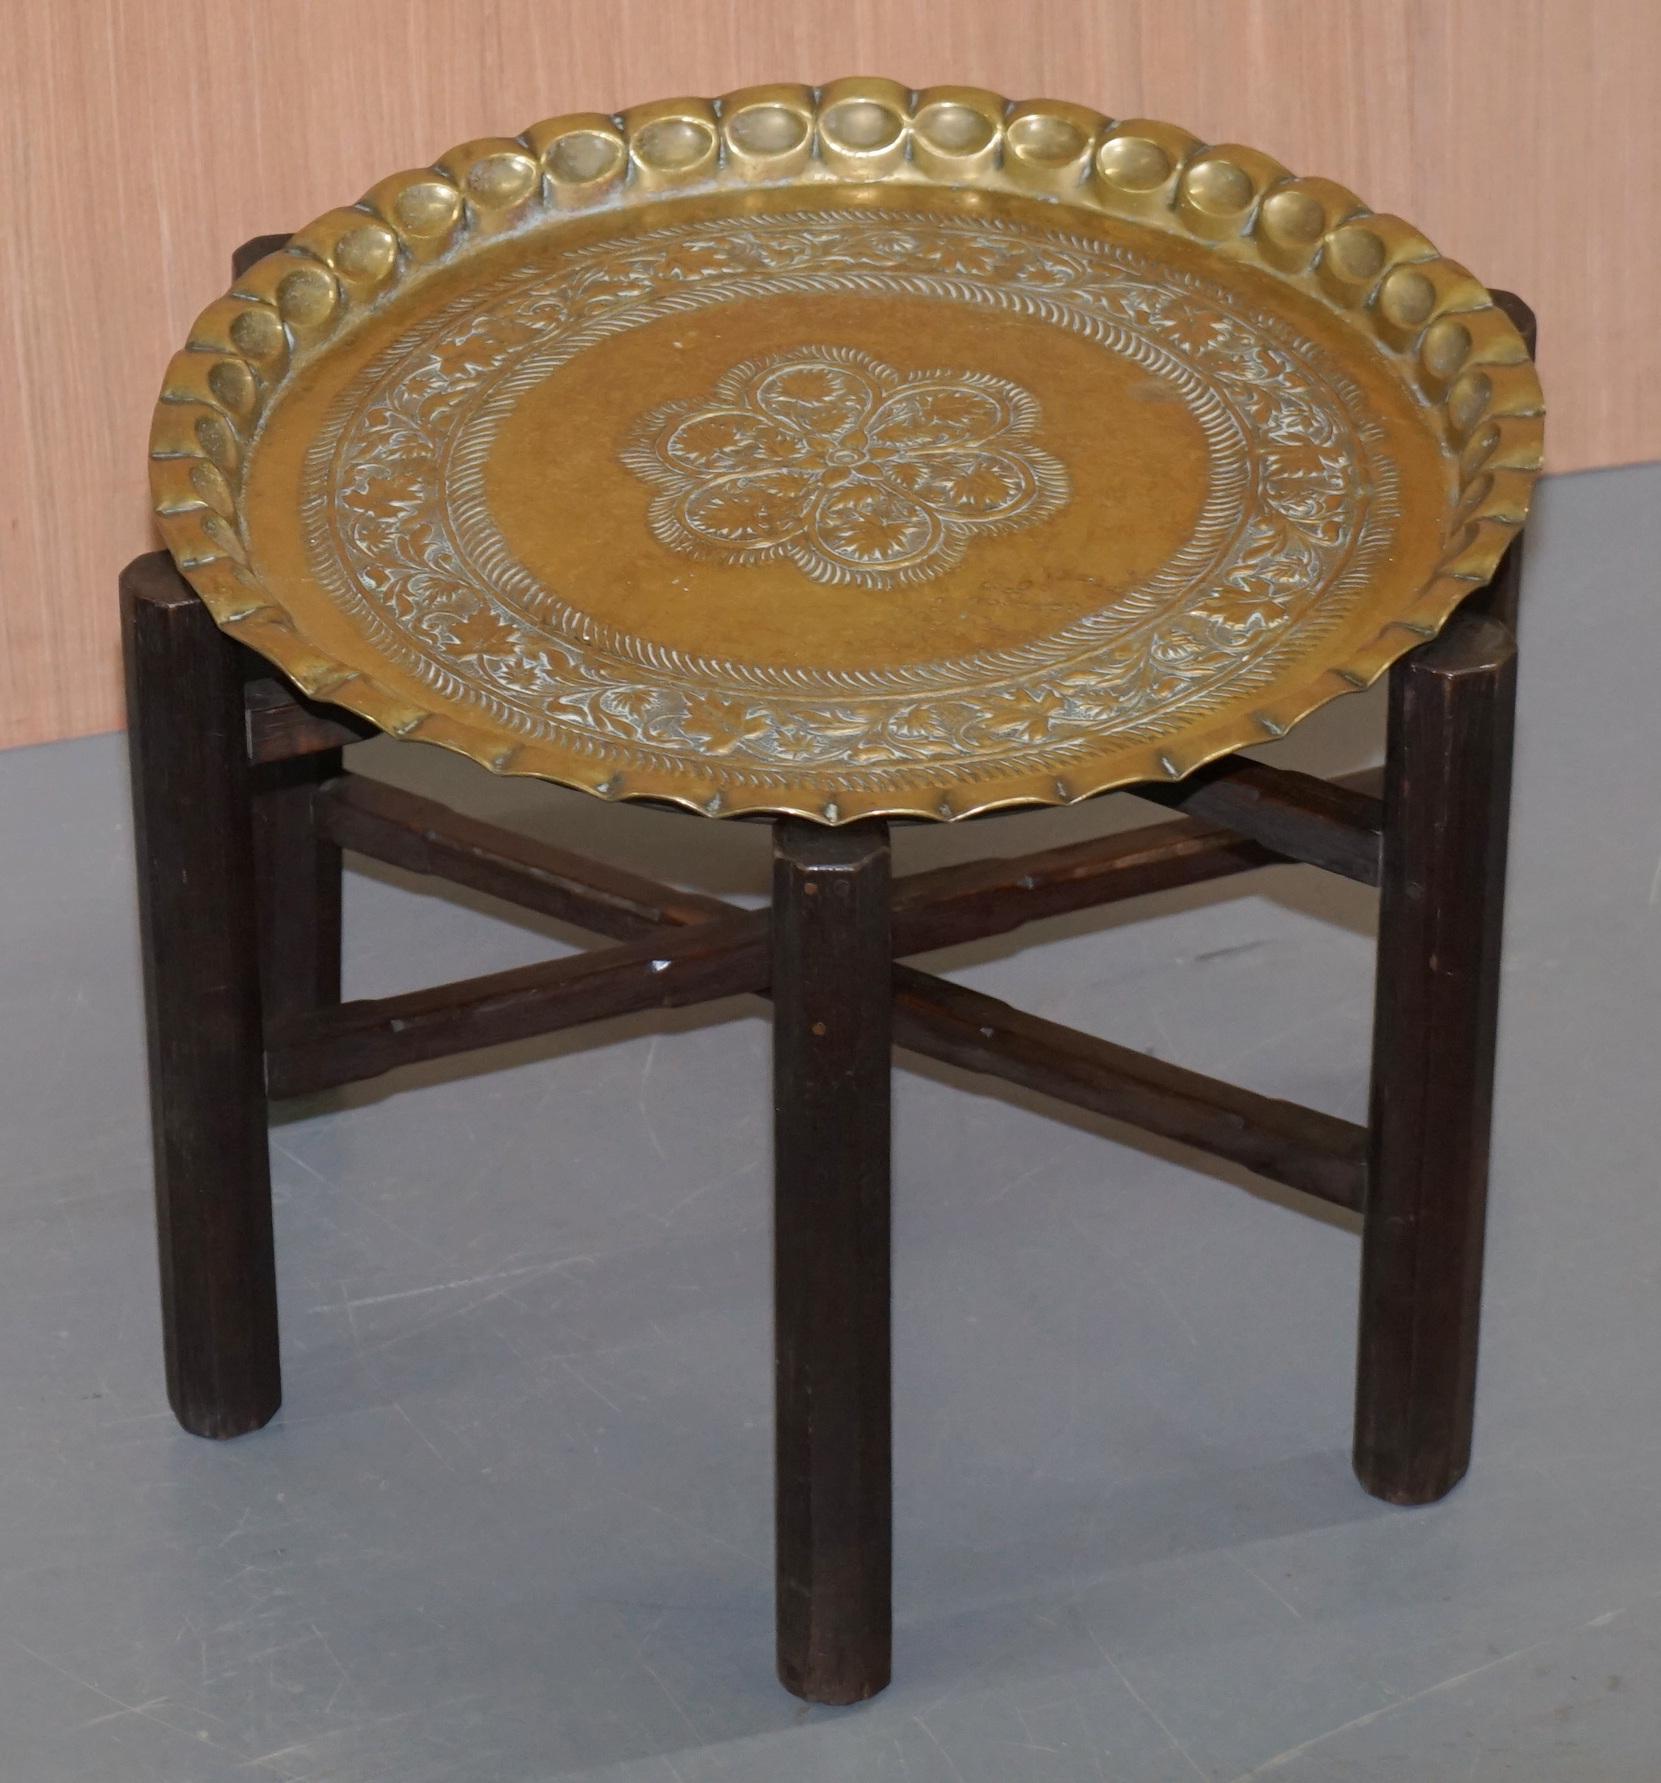 We are delighted to offer for sale this circa very rare 1920-1940 antique Persian Moroccan engraved brass top folding table

A very good looking and well made table, the top is beautifully engraved by hand

We have lightly restored the piece to